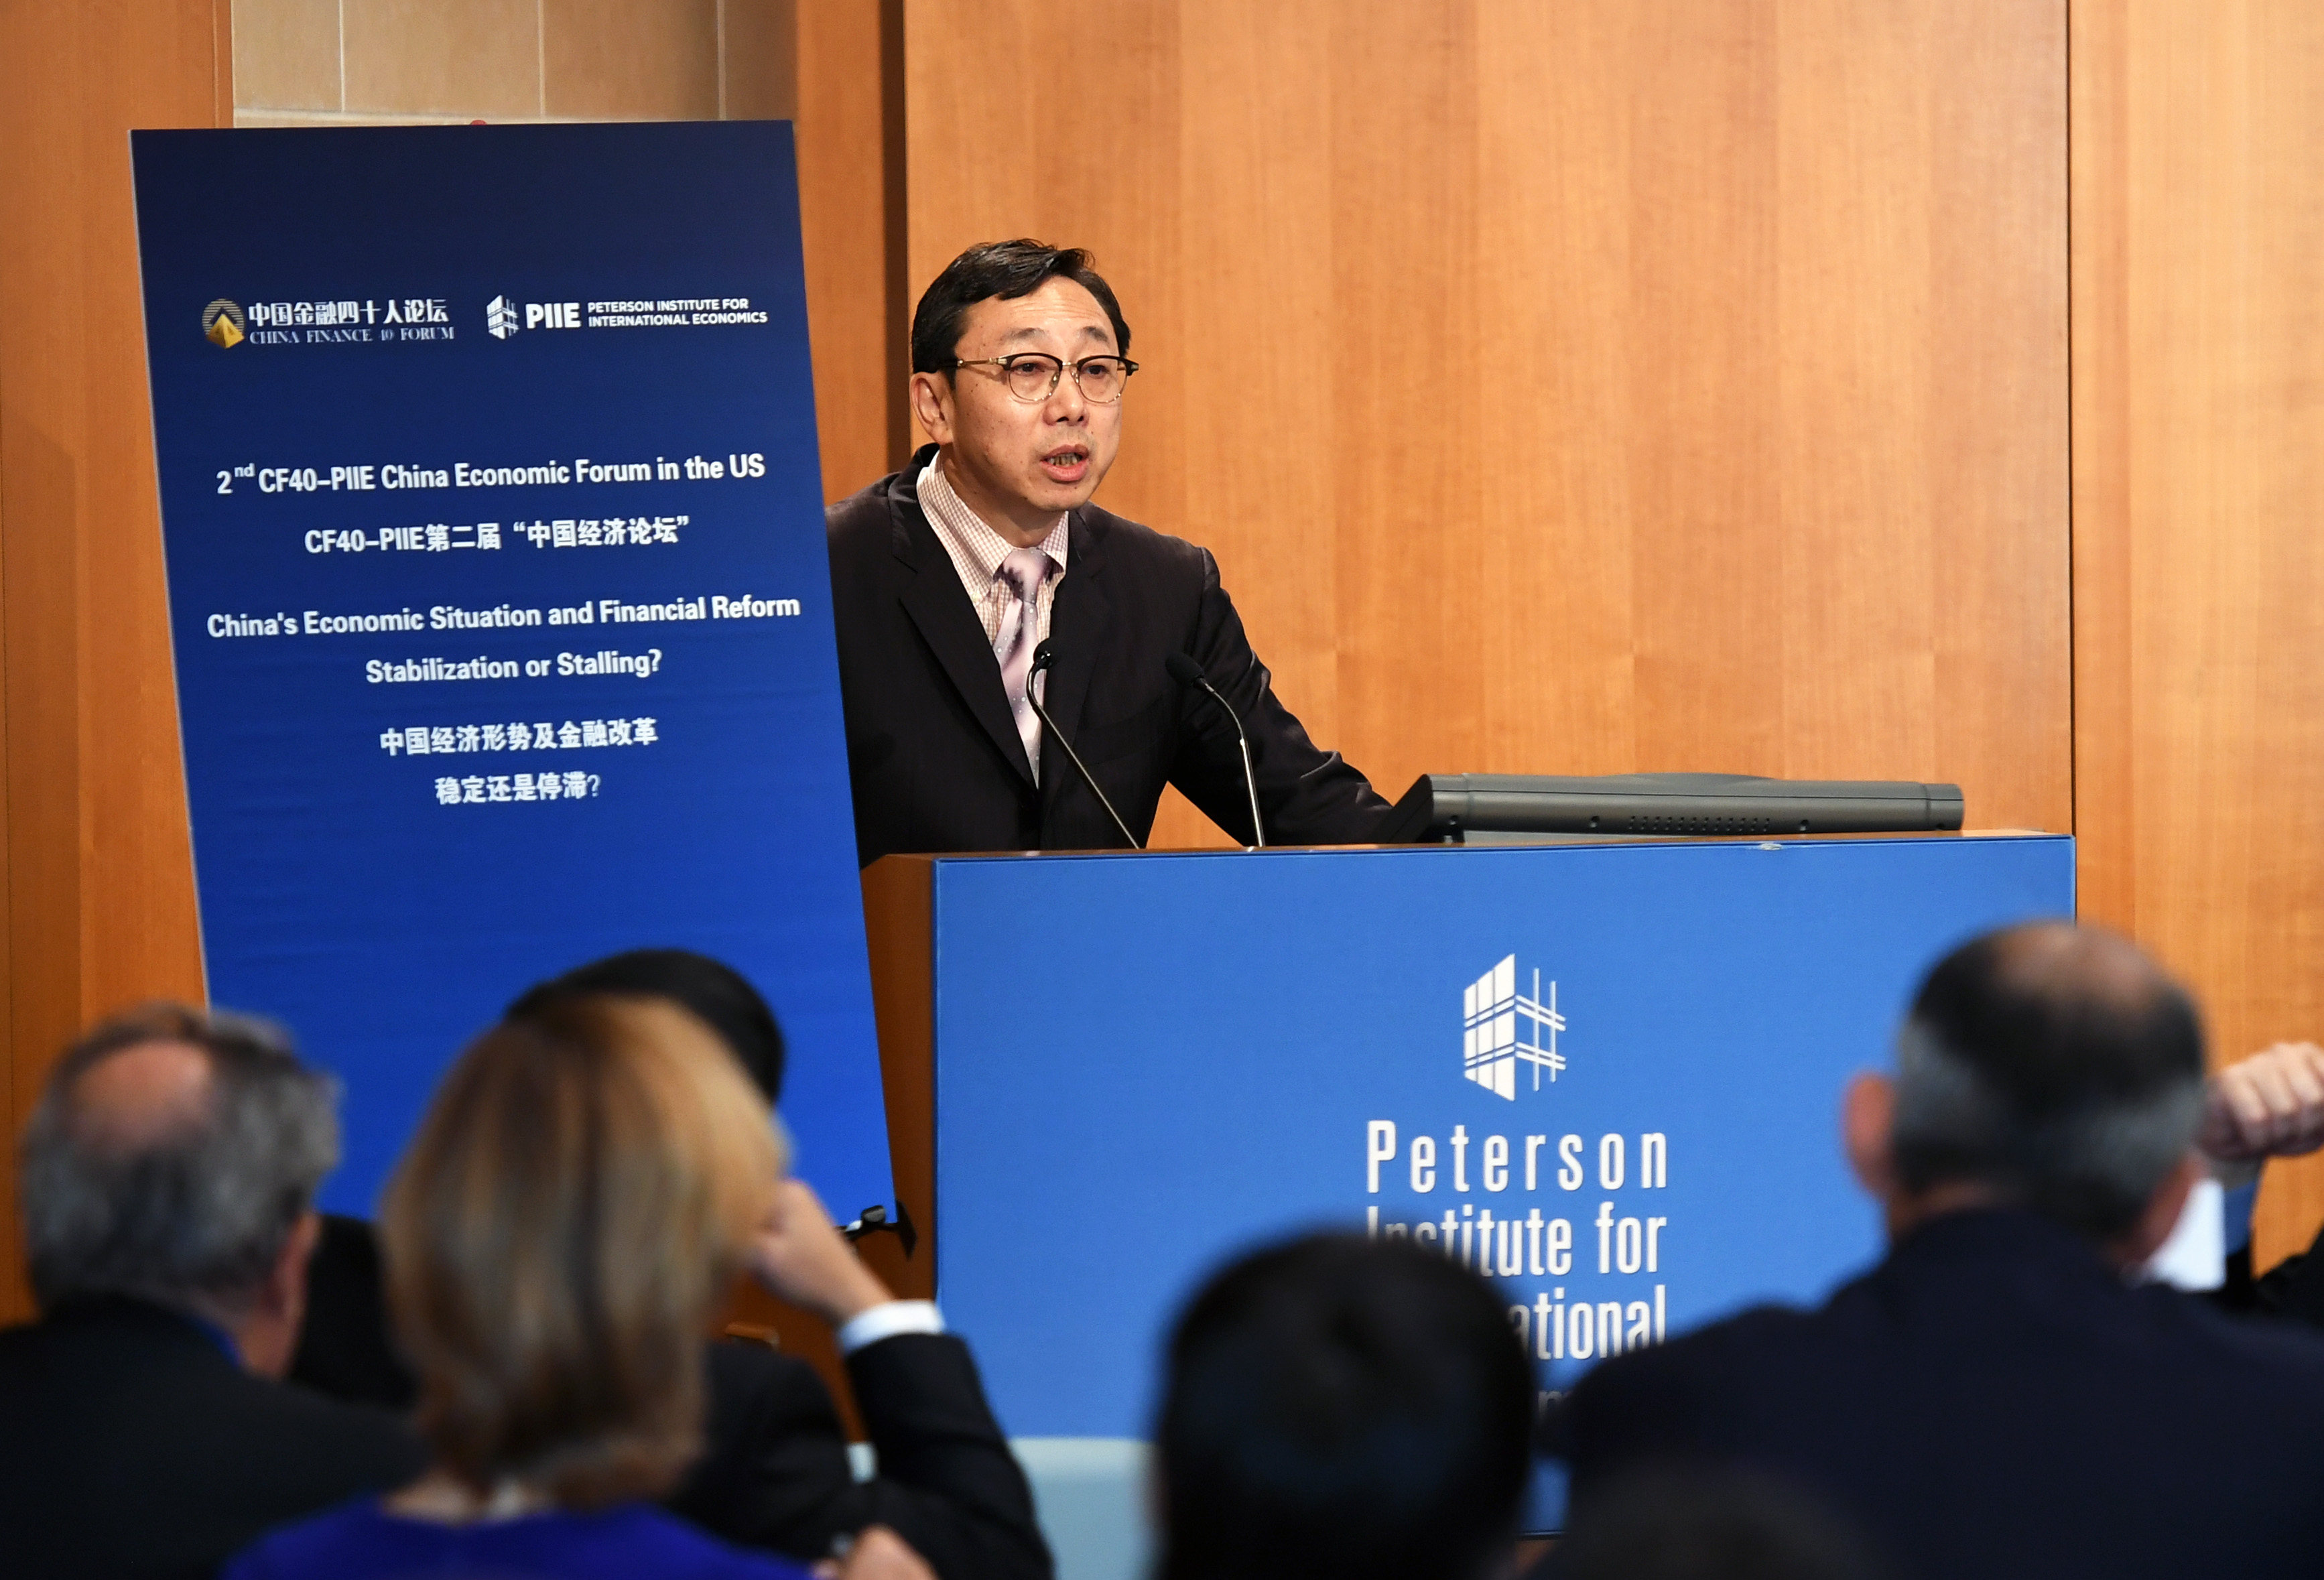 Zhang Tao, then deputy managing director of the International Monetary Fund (IMF), speaking at the Peterson Institute for International Economics in Washington DC on October 5, 2016. Photo: Xinhua